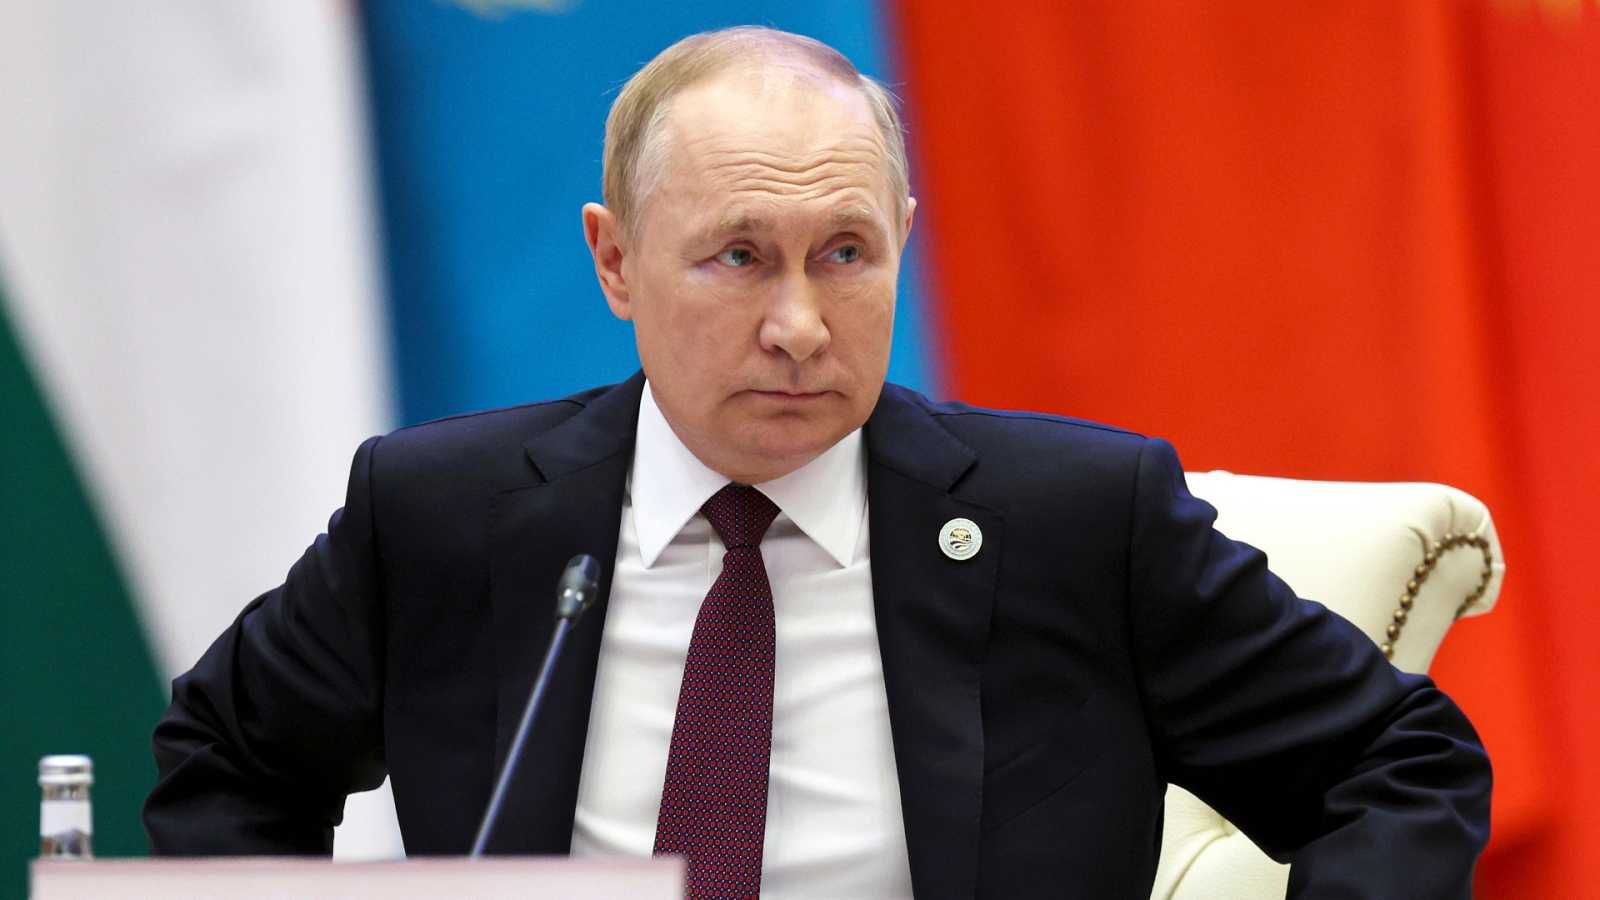 Putin denounces the “failure” of US policy in the Middle East